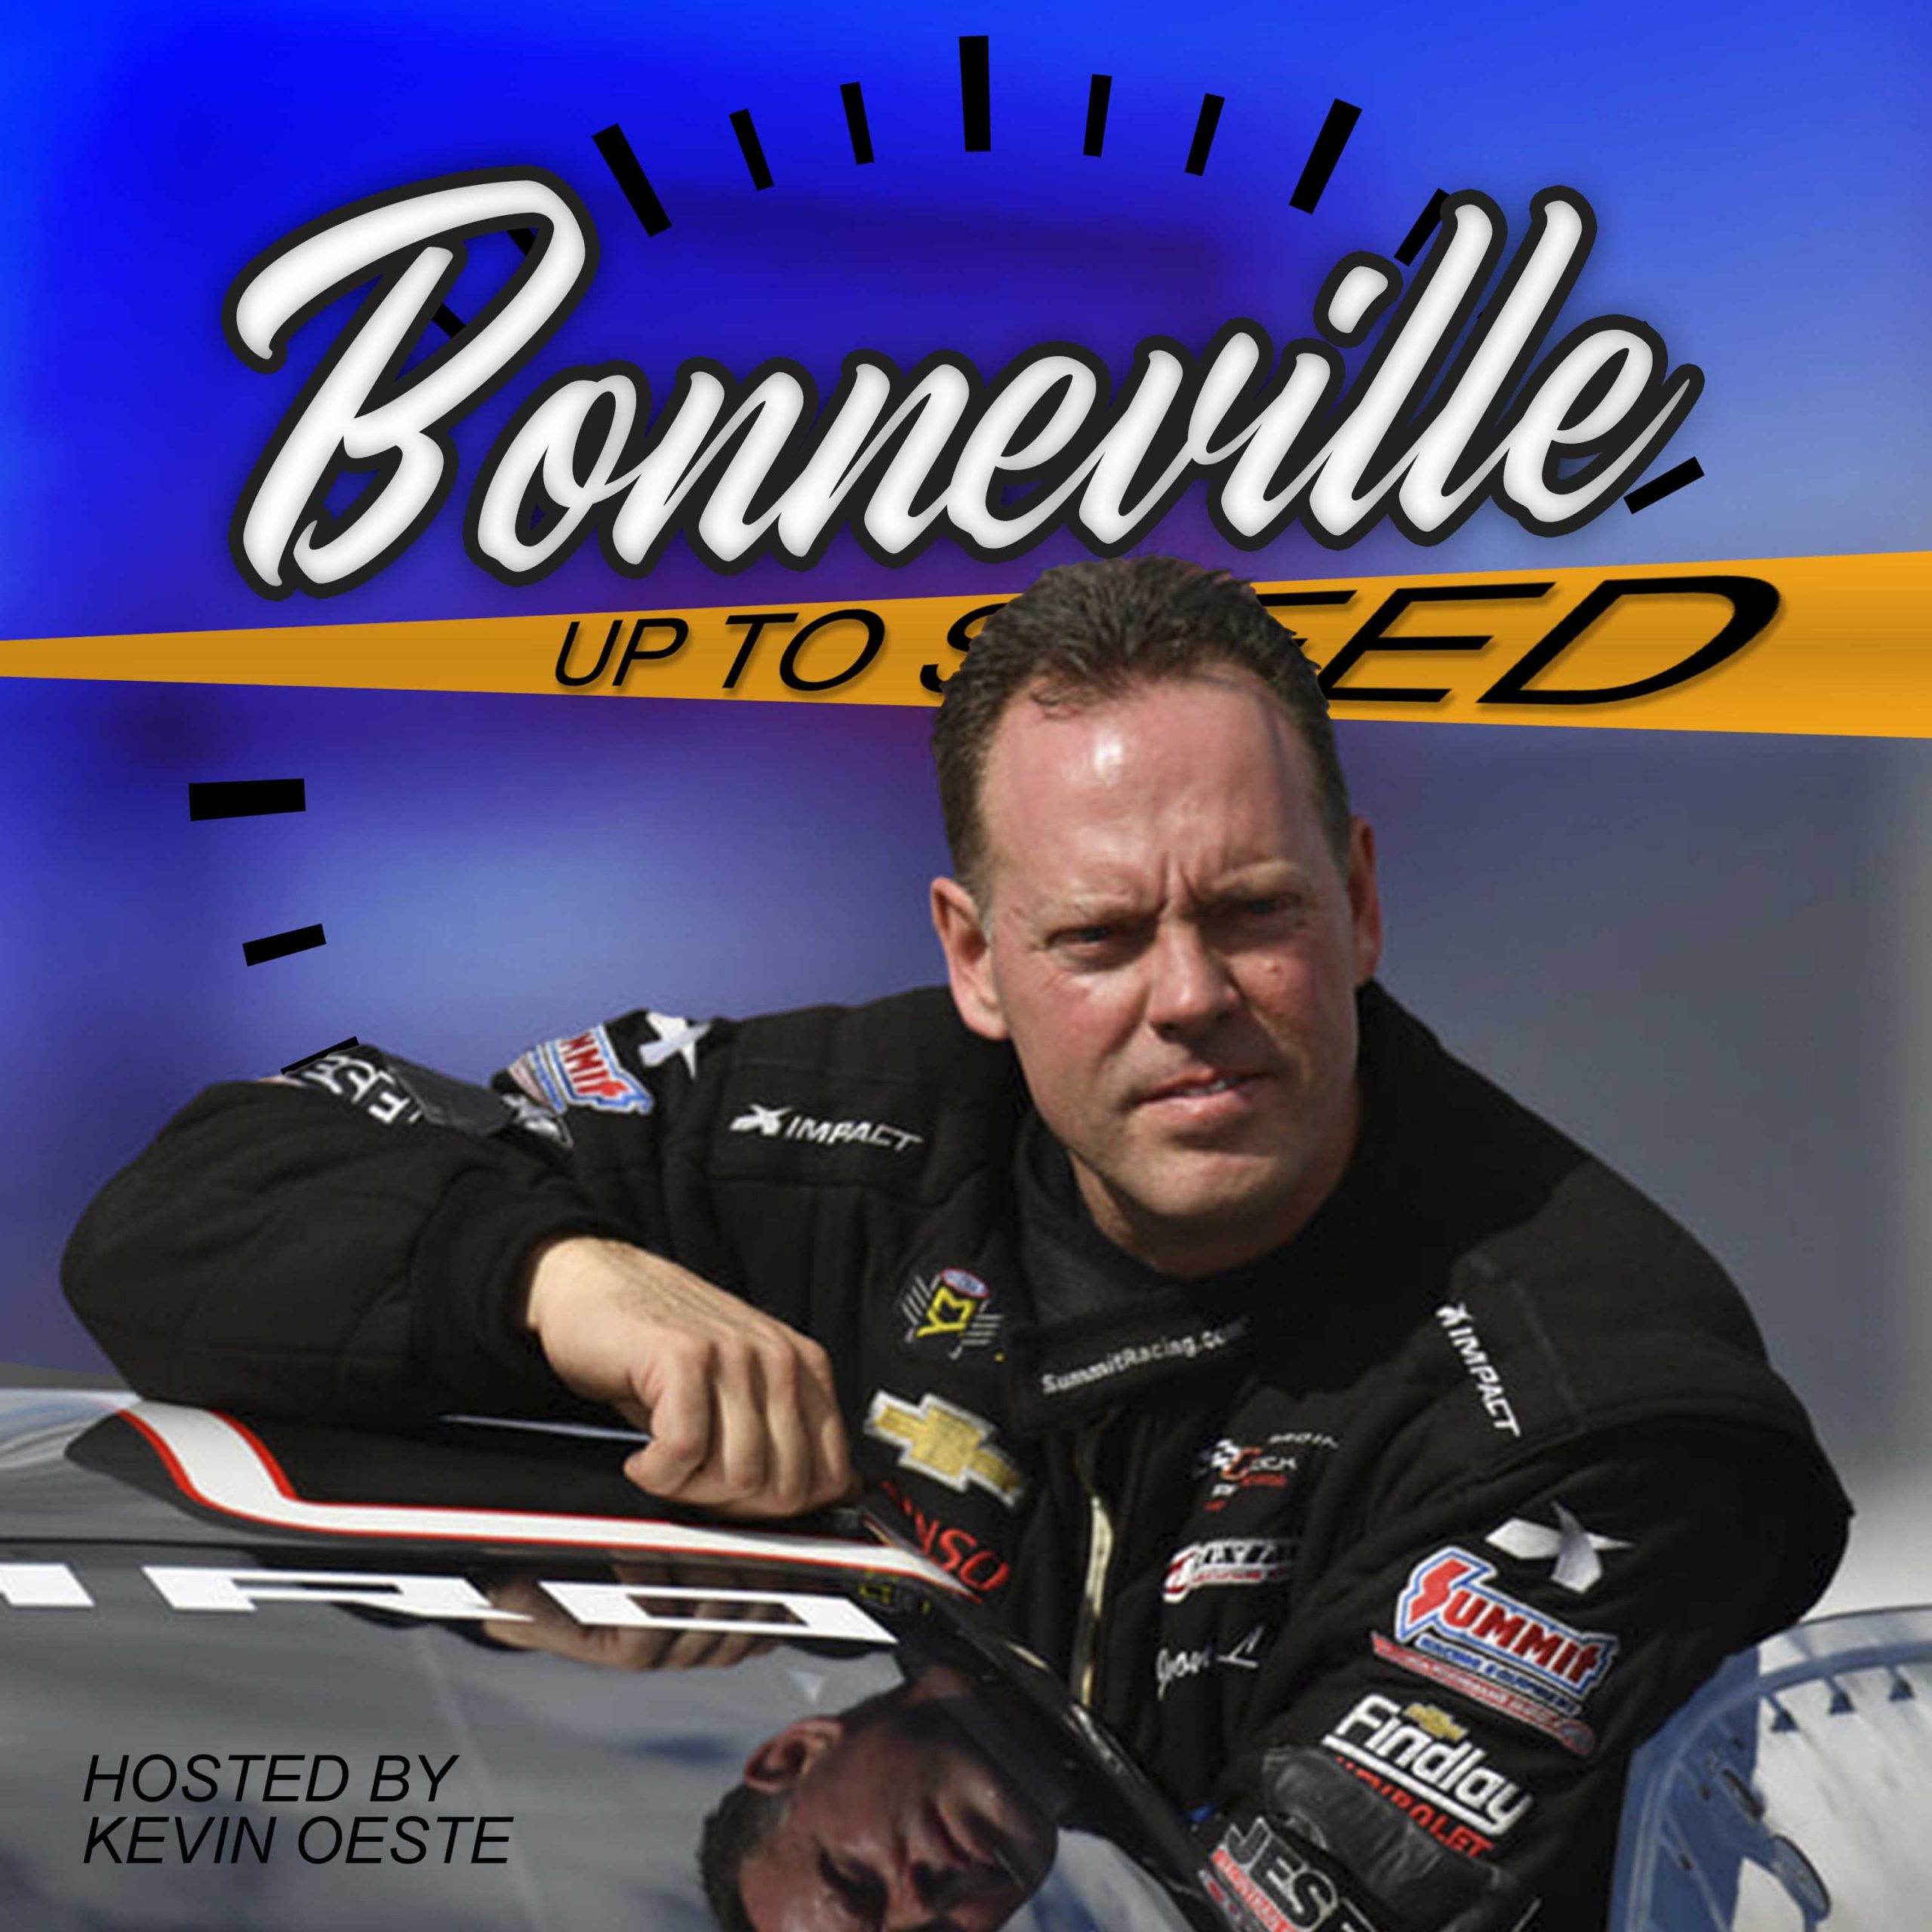 Catching Up With Jason Line at the 2022 PRI Show on the Bonneville Up To Speed Podcast